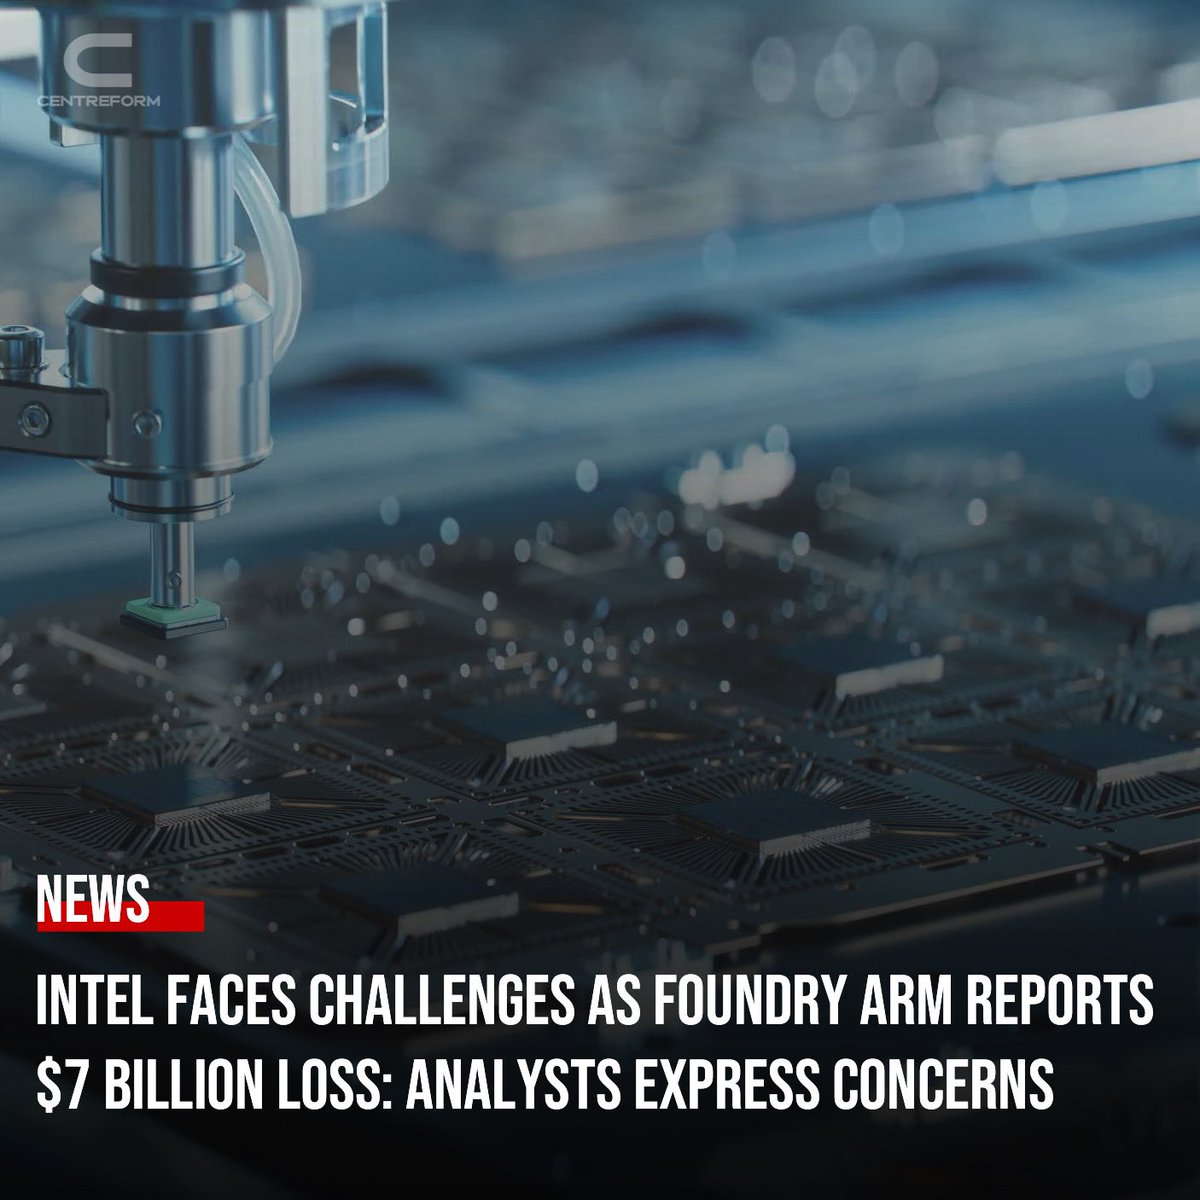 Intel's shares dip as it reveals a $7 billion operating loss for its foundry business in 2023, raising doubts about its ability to compete in the AI-chip sector. Analysts question Intel's timeline for profitability and client acquisition in the foundry segment, highlighting